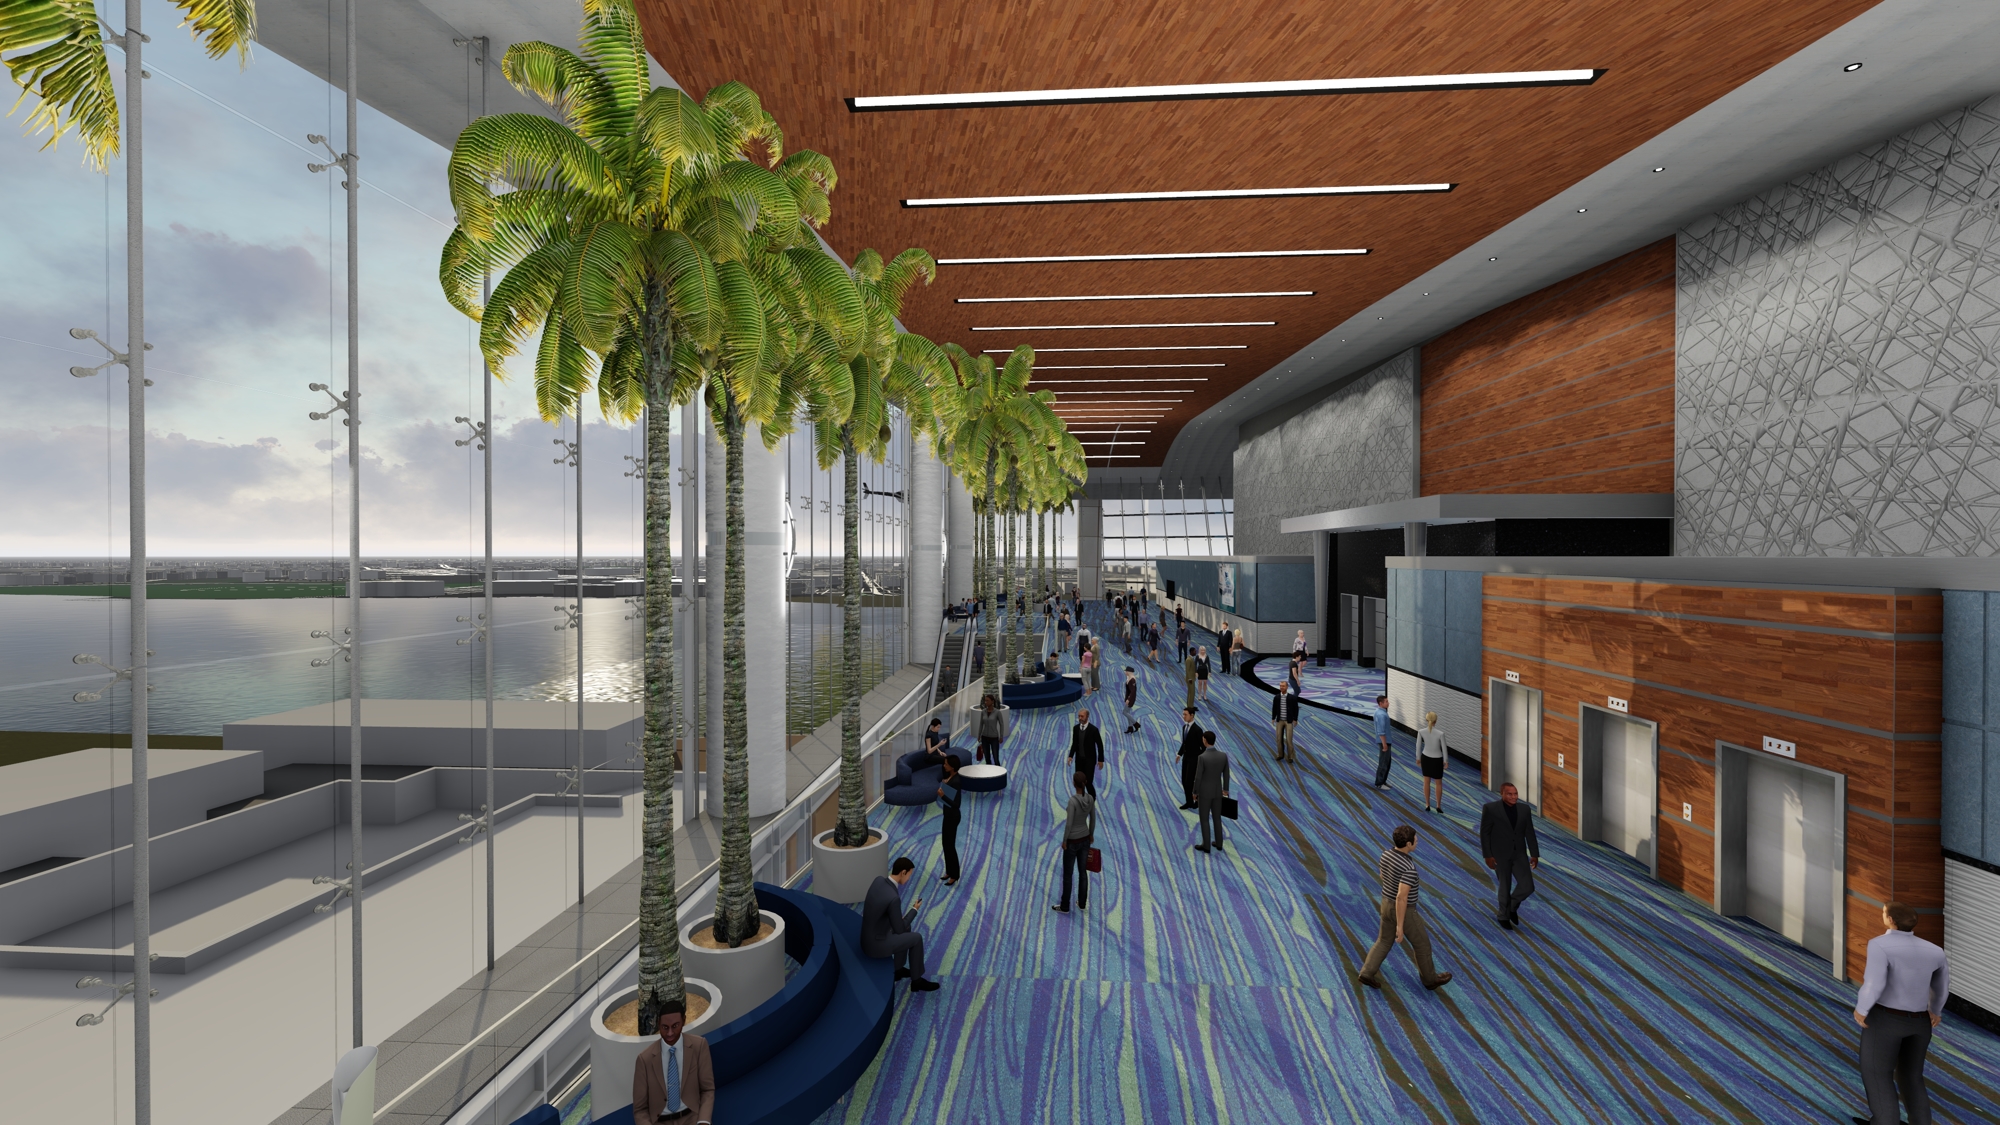 The convention center would offer views of the St. Johns River.